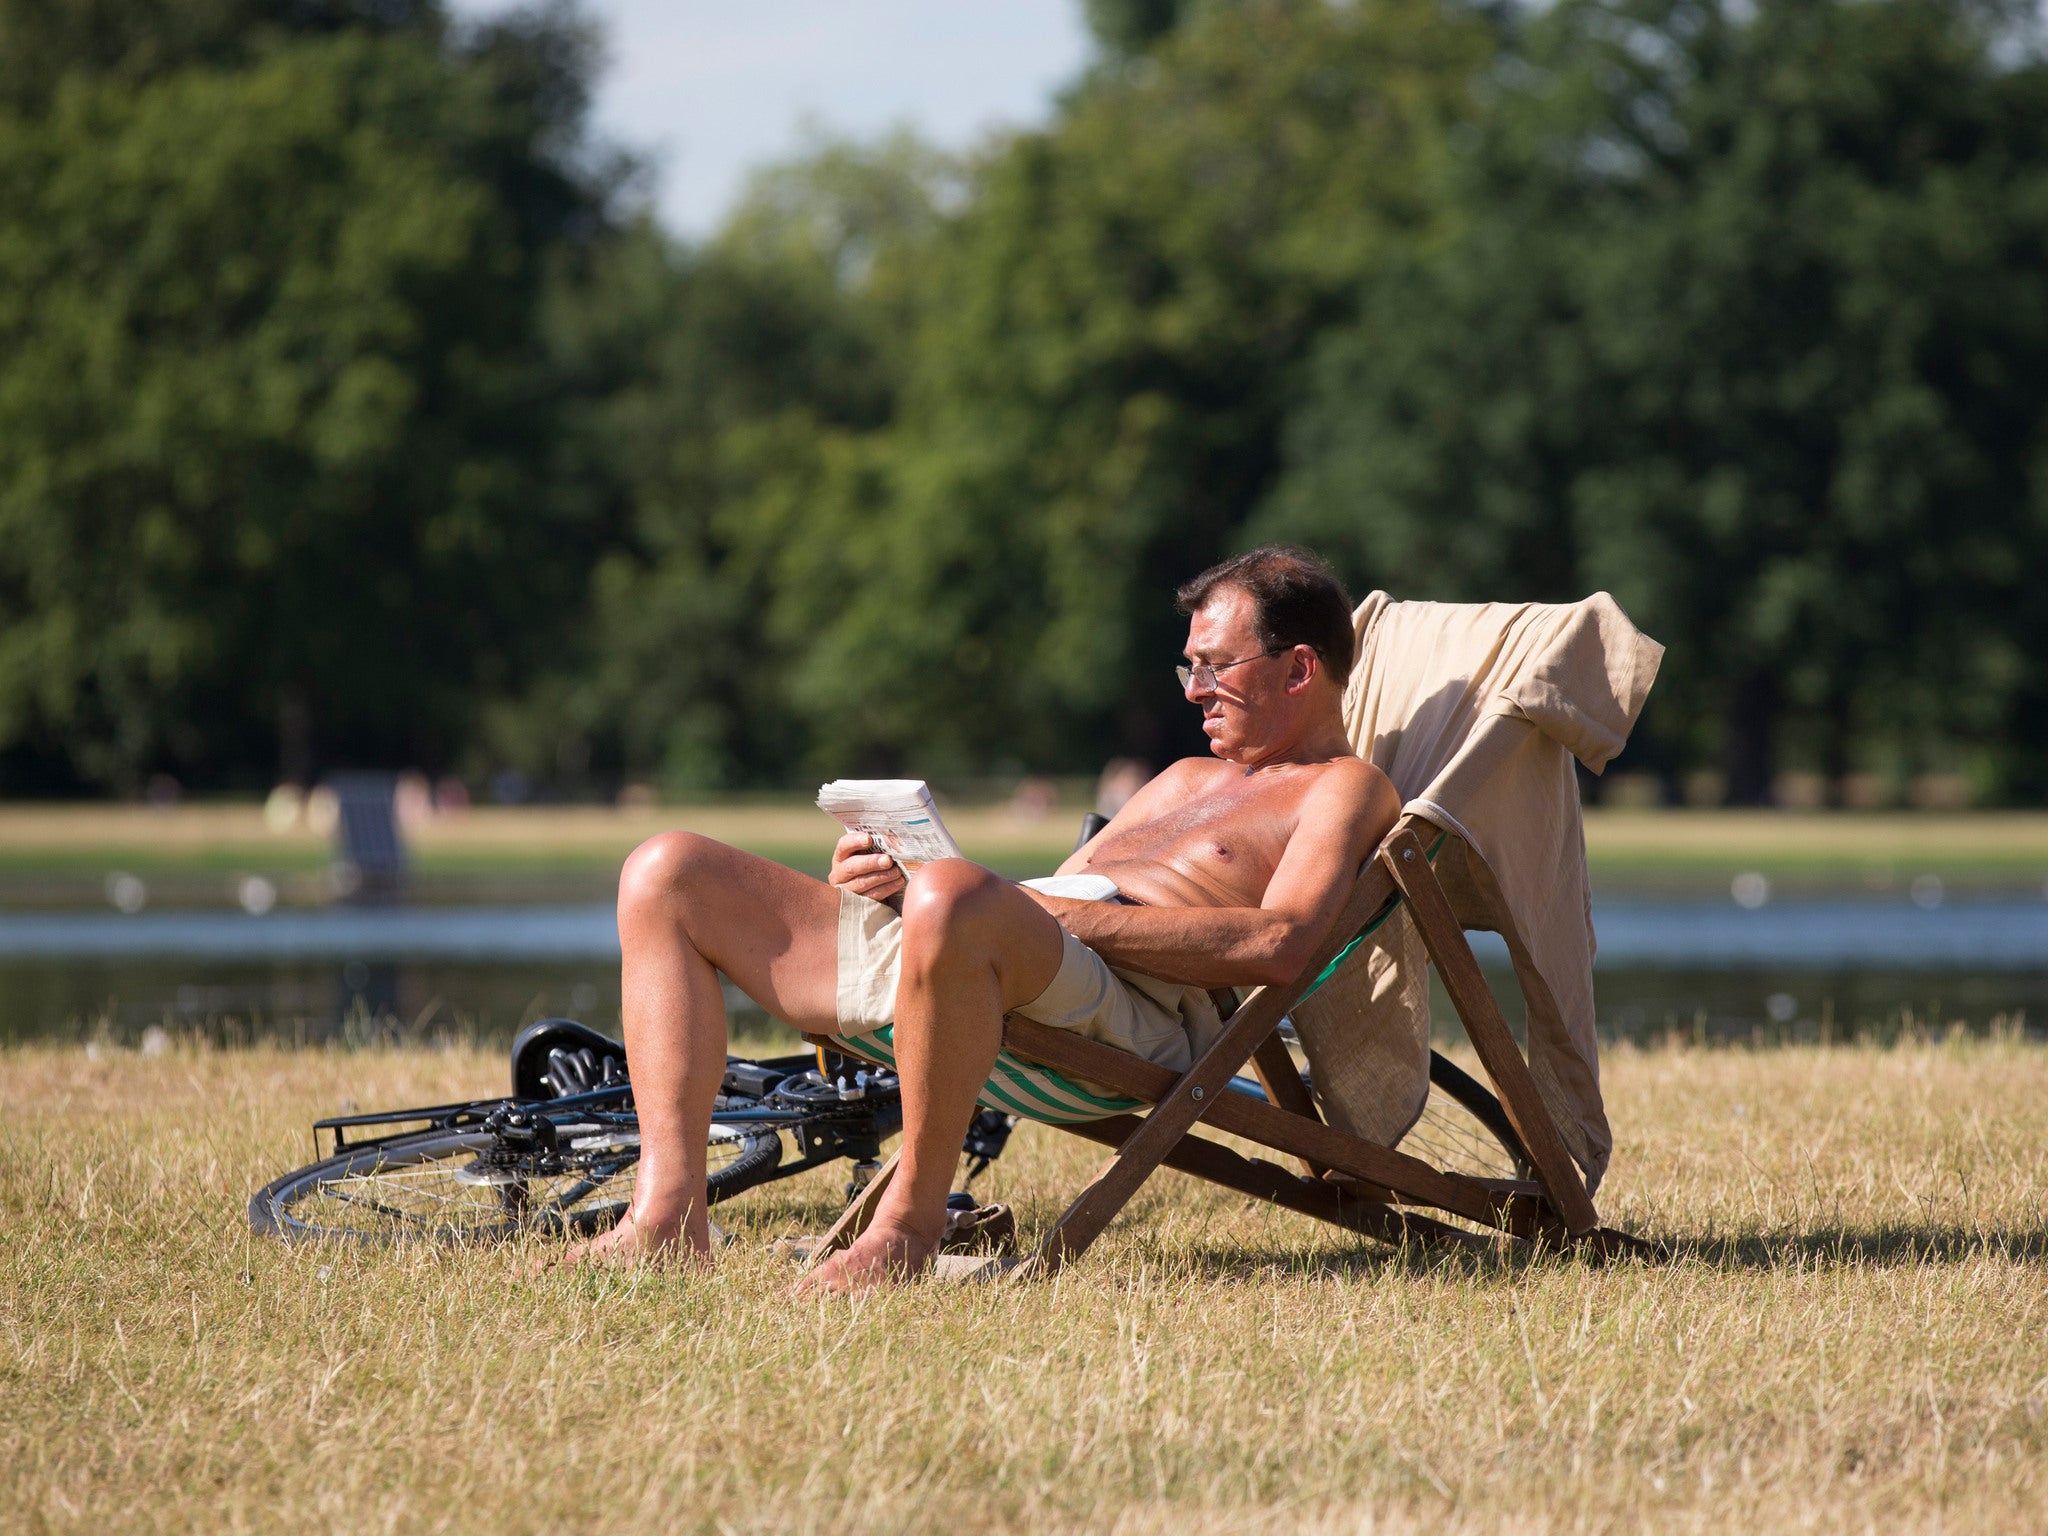 A man relaxes in warm weather in London's Hyde Park during the heatwave of summer 2014.